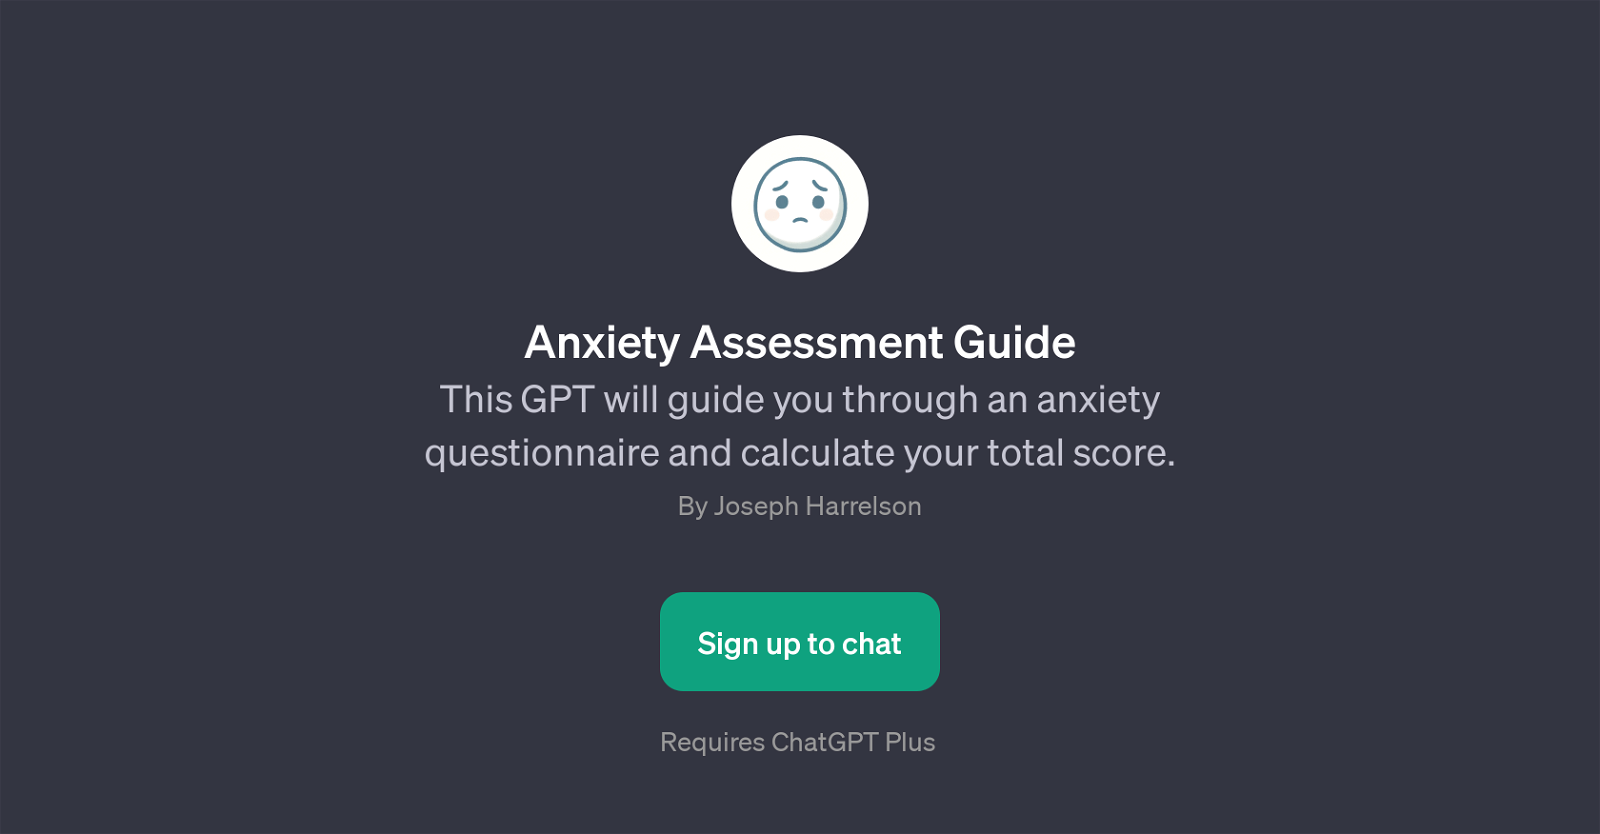 Anxiety Assessment Guide website